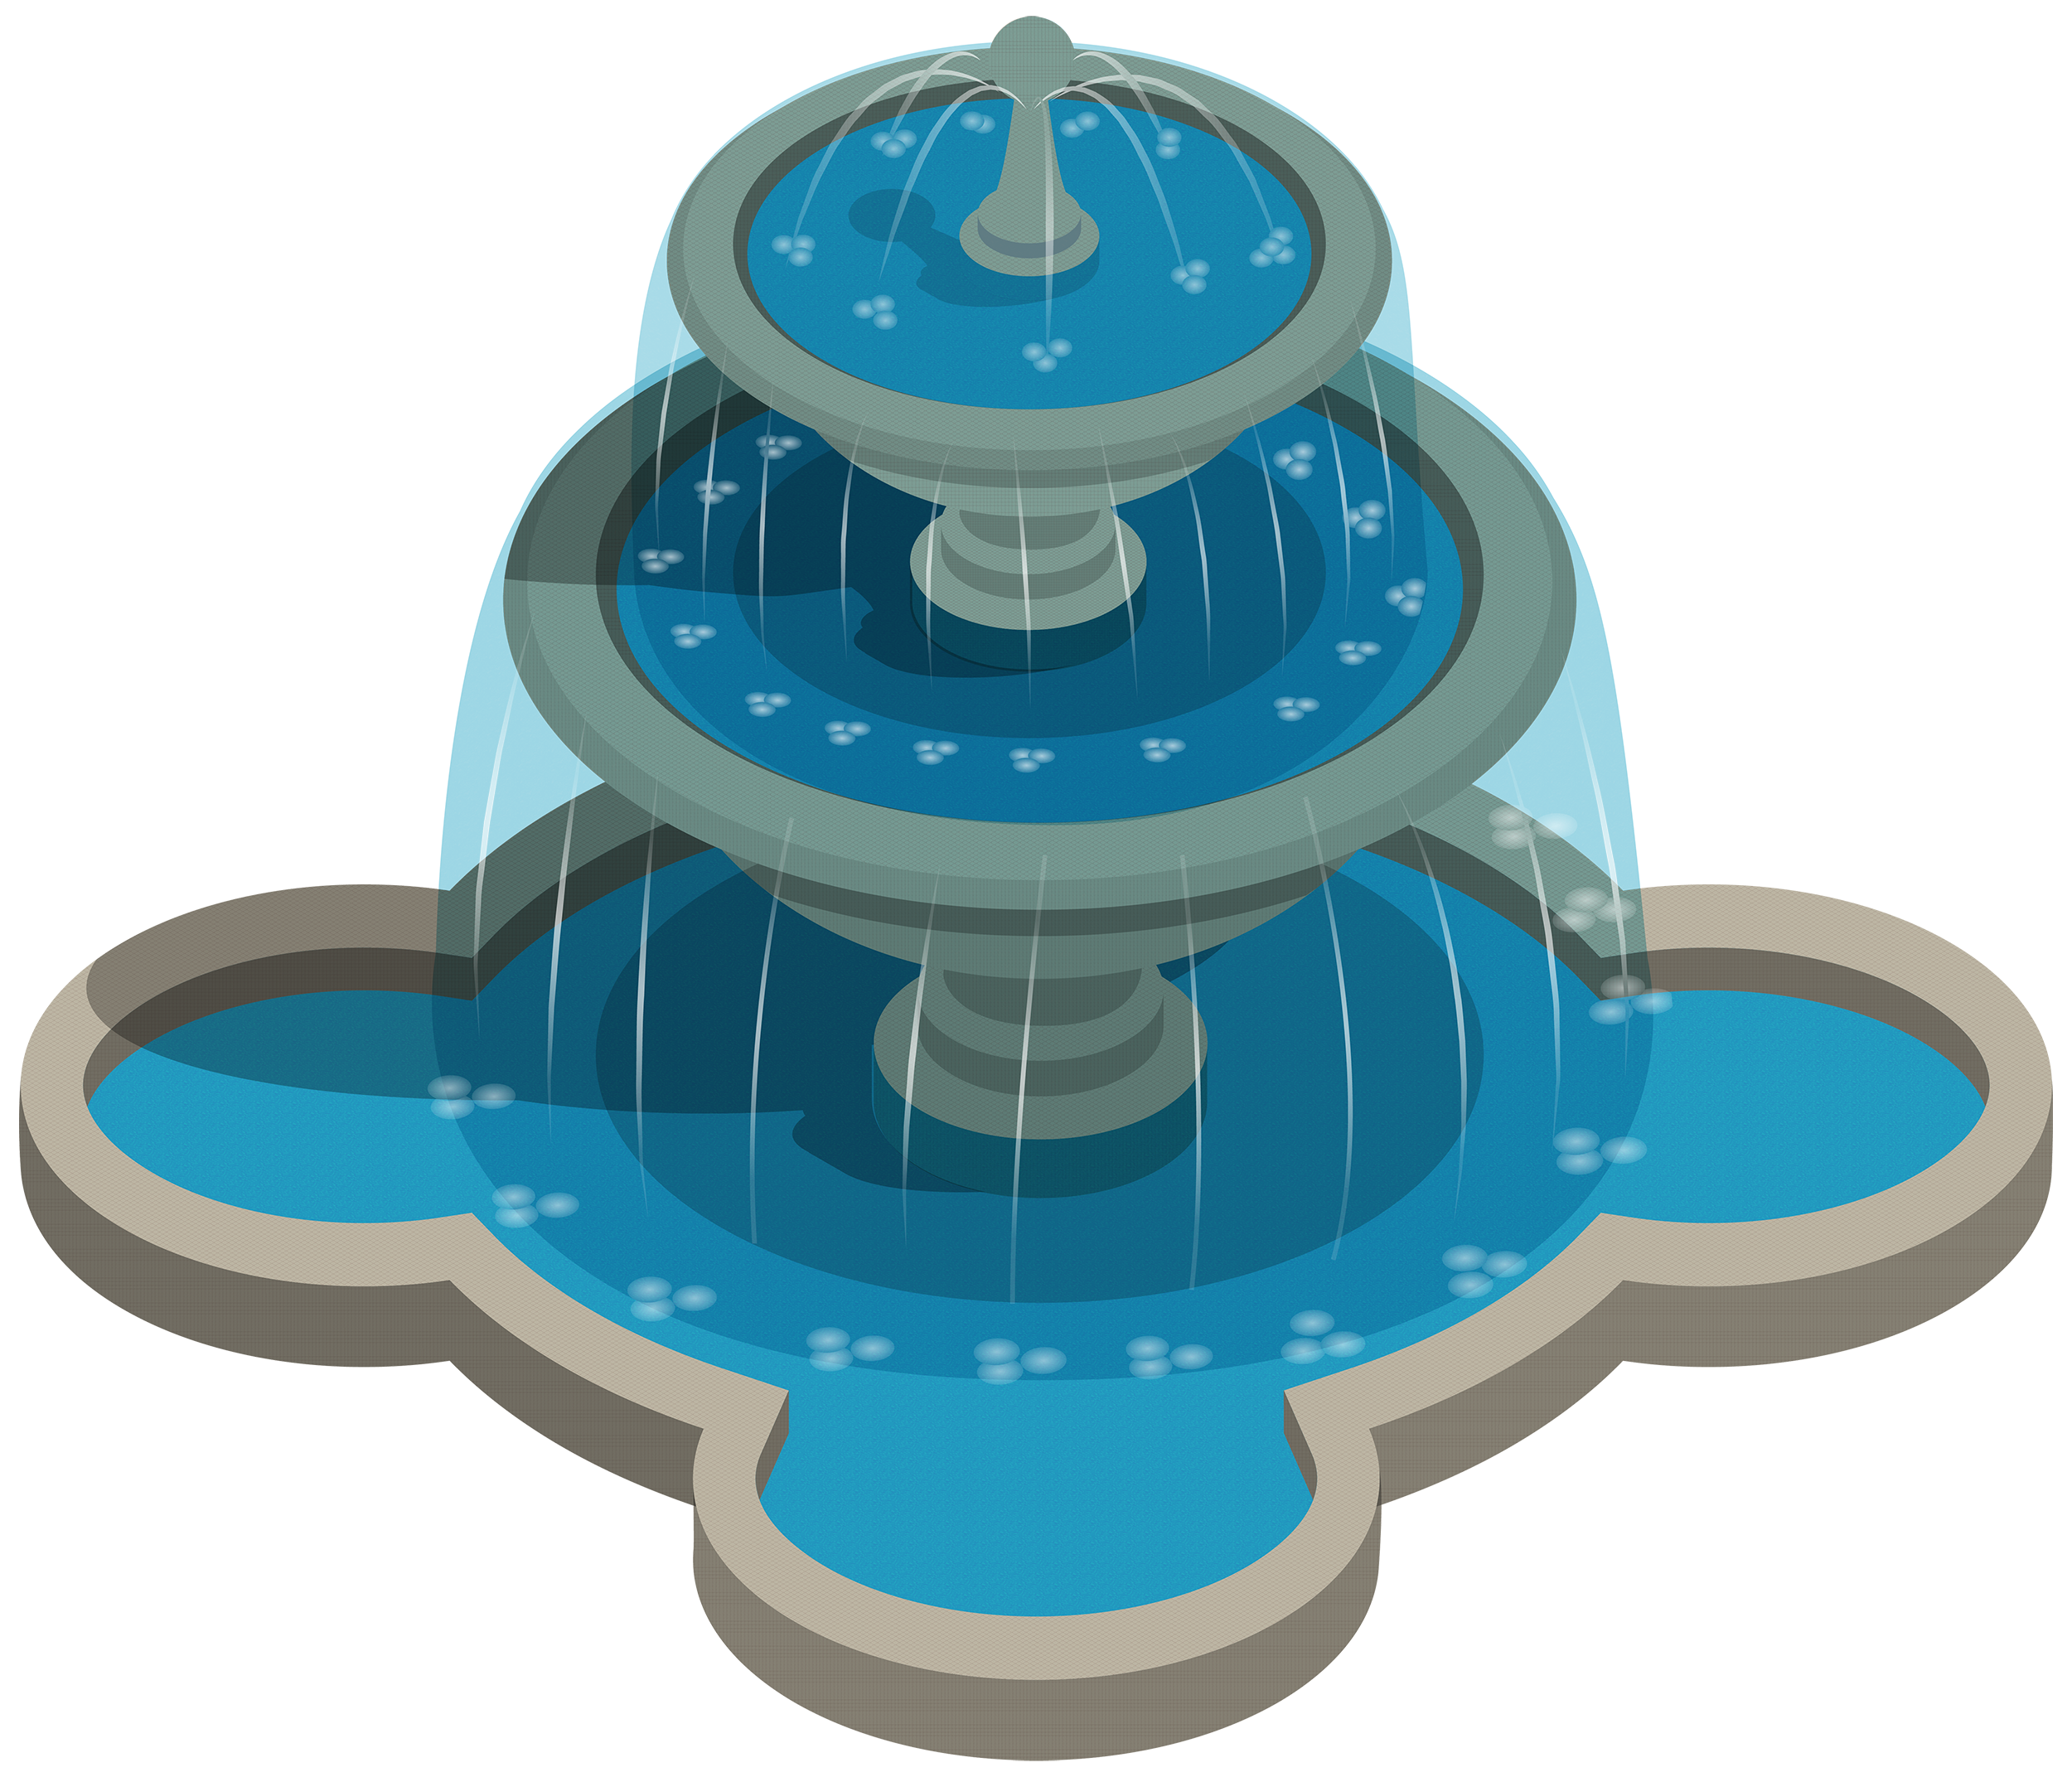 Water fountain png.